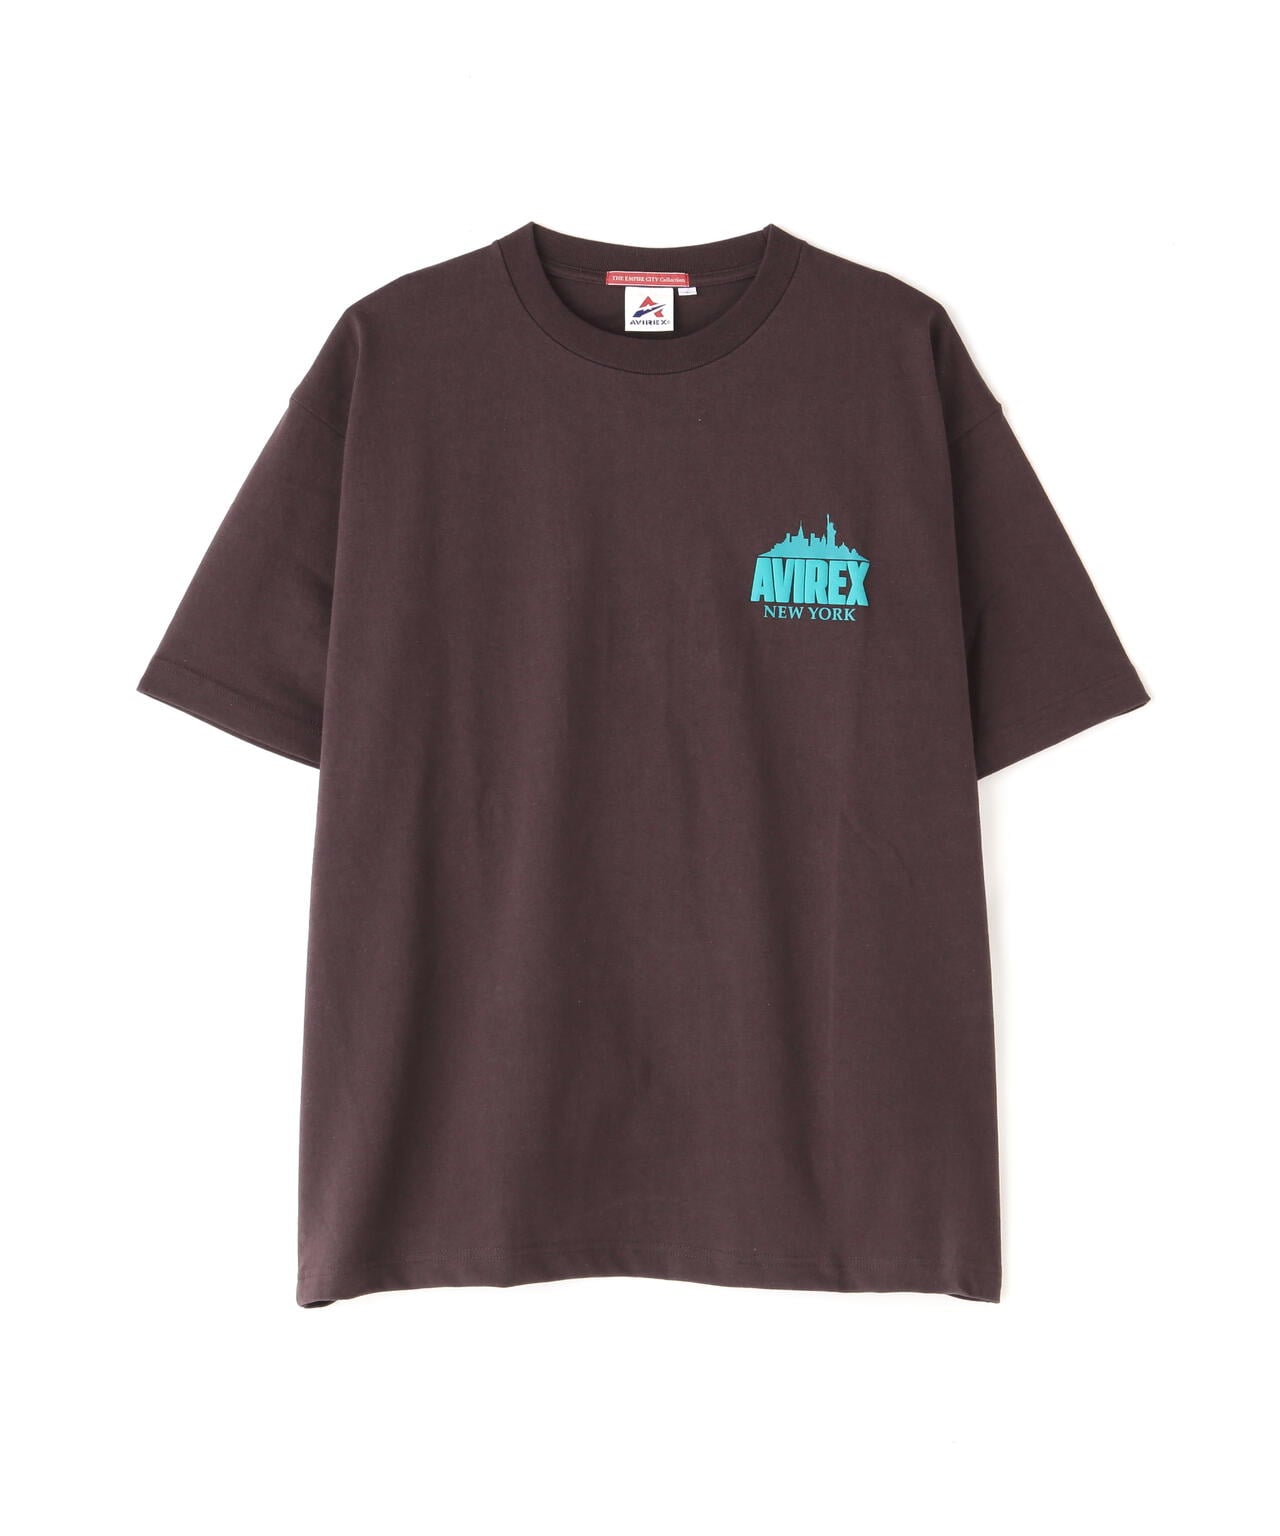 COLLECTION》NEWYORK CITY SCAPE SHORT SLEEVE T-SHIRT/ニューヨーク 